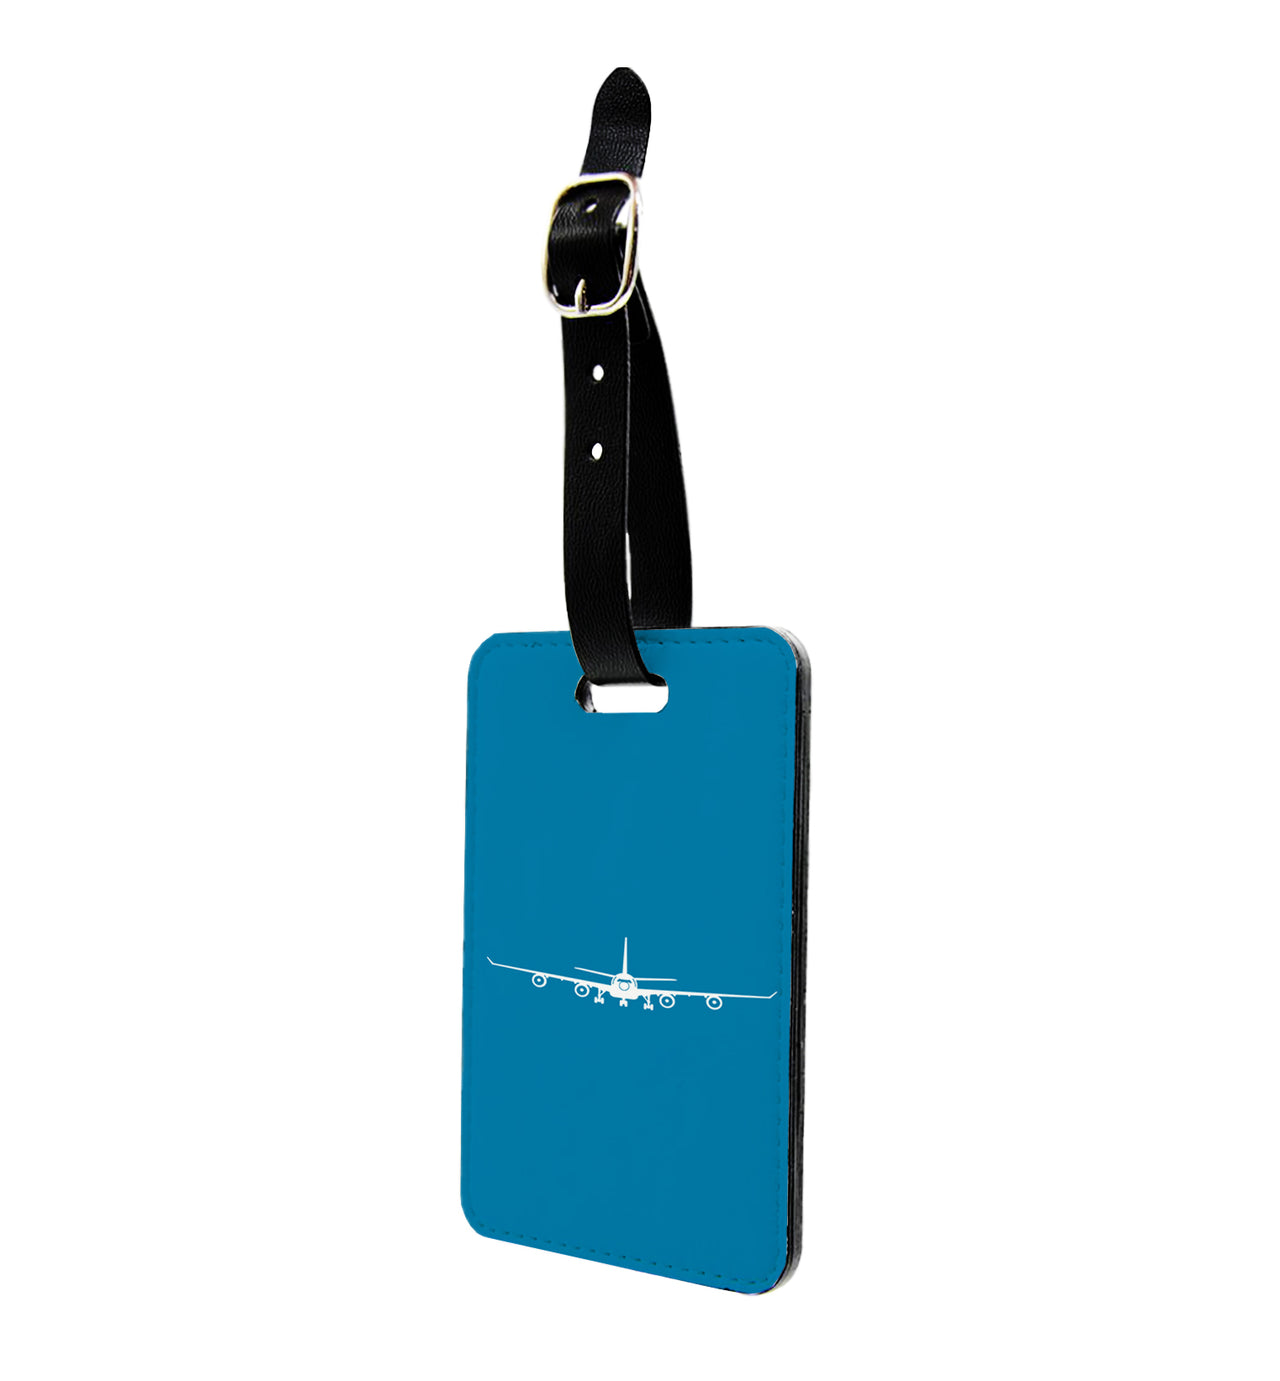 Airbus A340 Silhouette Designed Luggage Tag